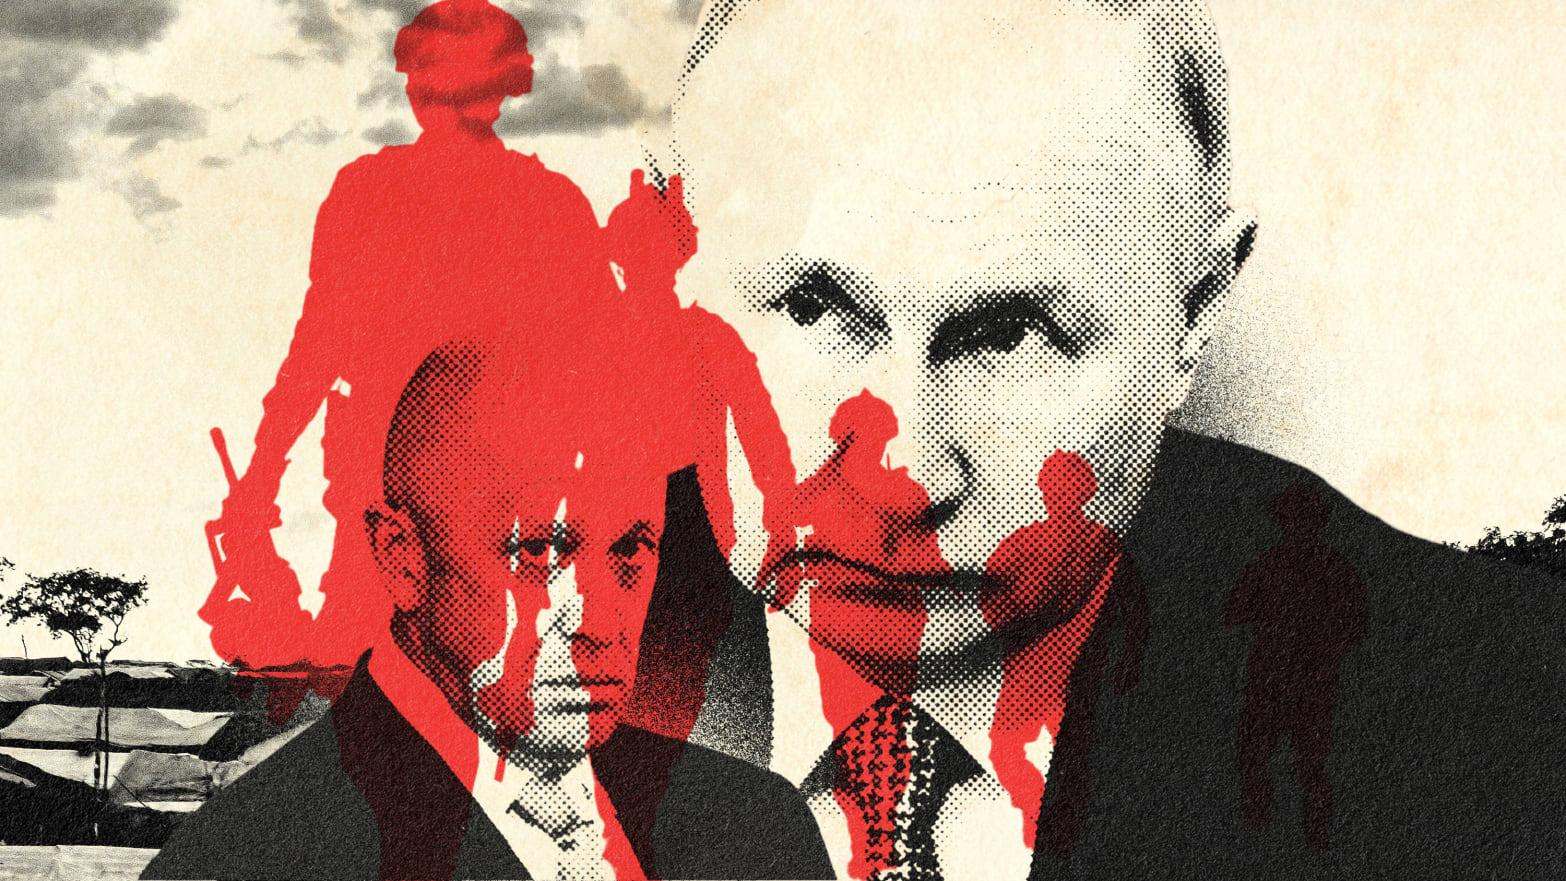 A photo illustration featuring Yevgeny Prigozhin and Vladimir Putin with the silhouette of soldiers on the foreground  